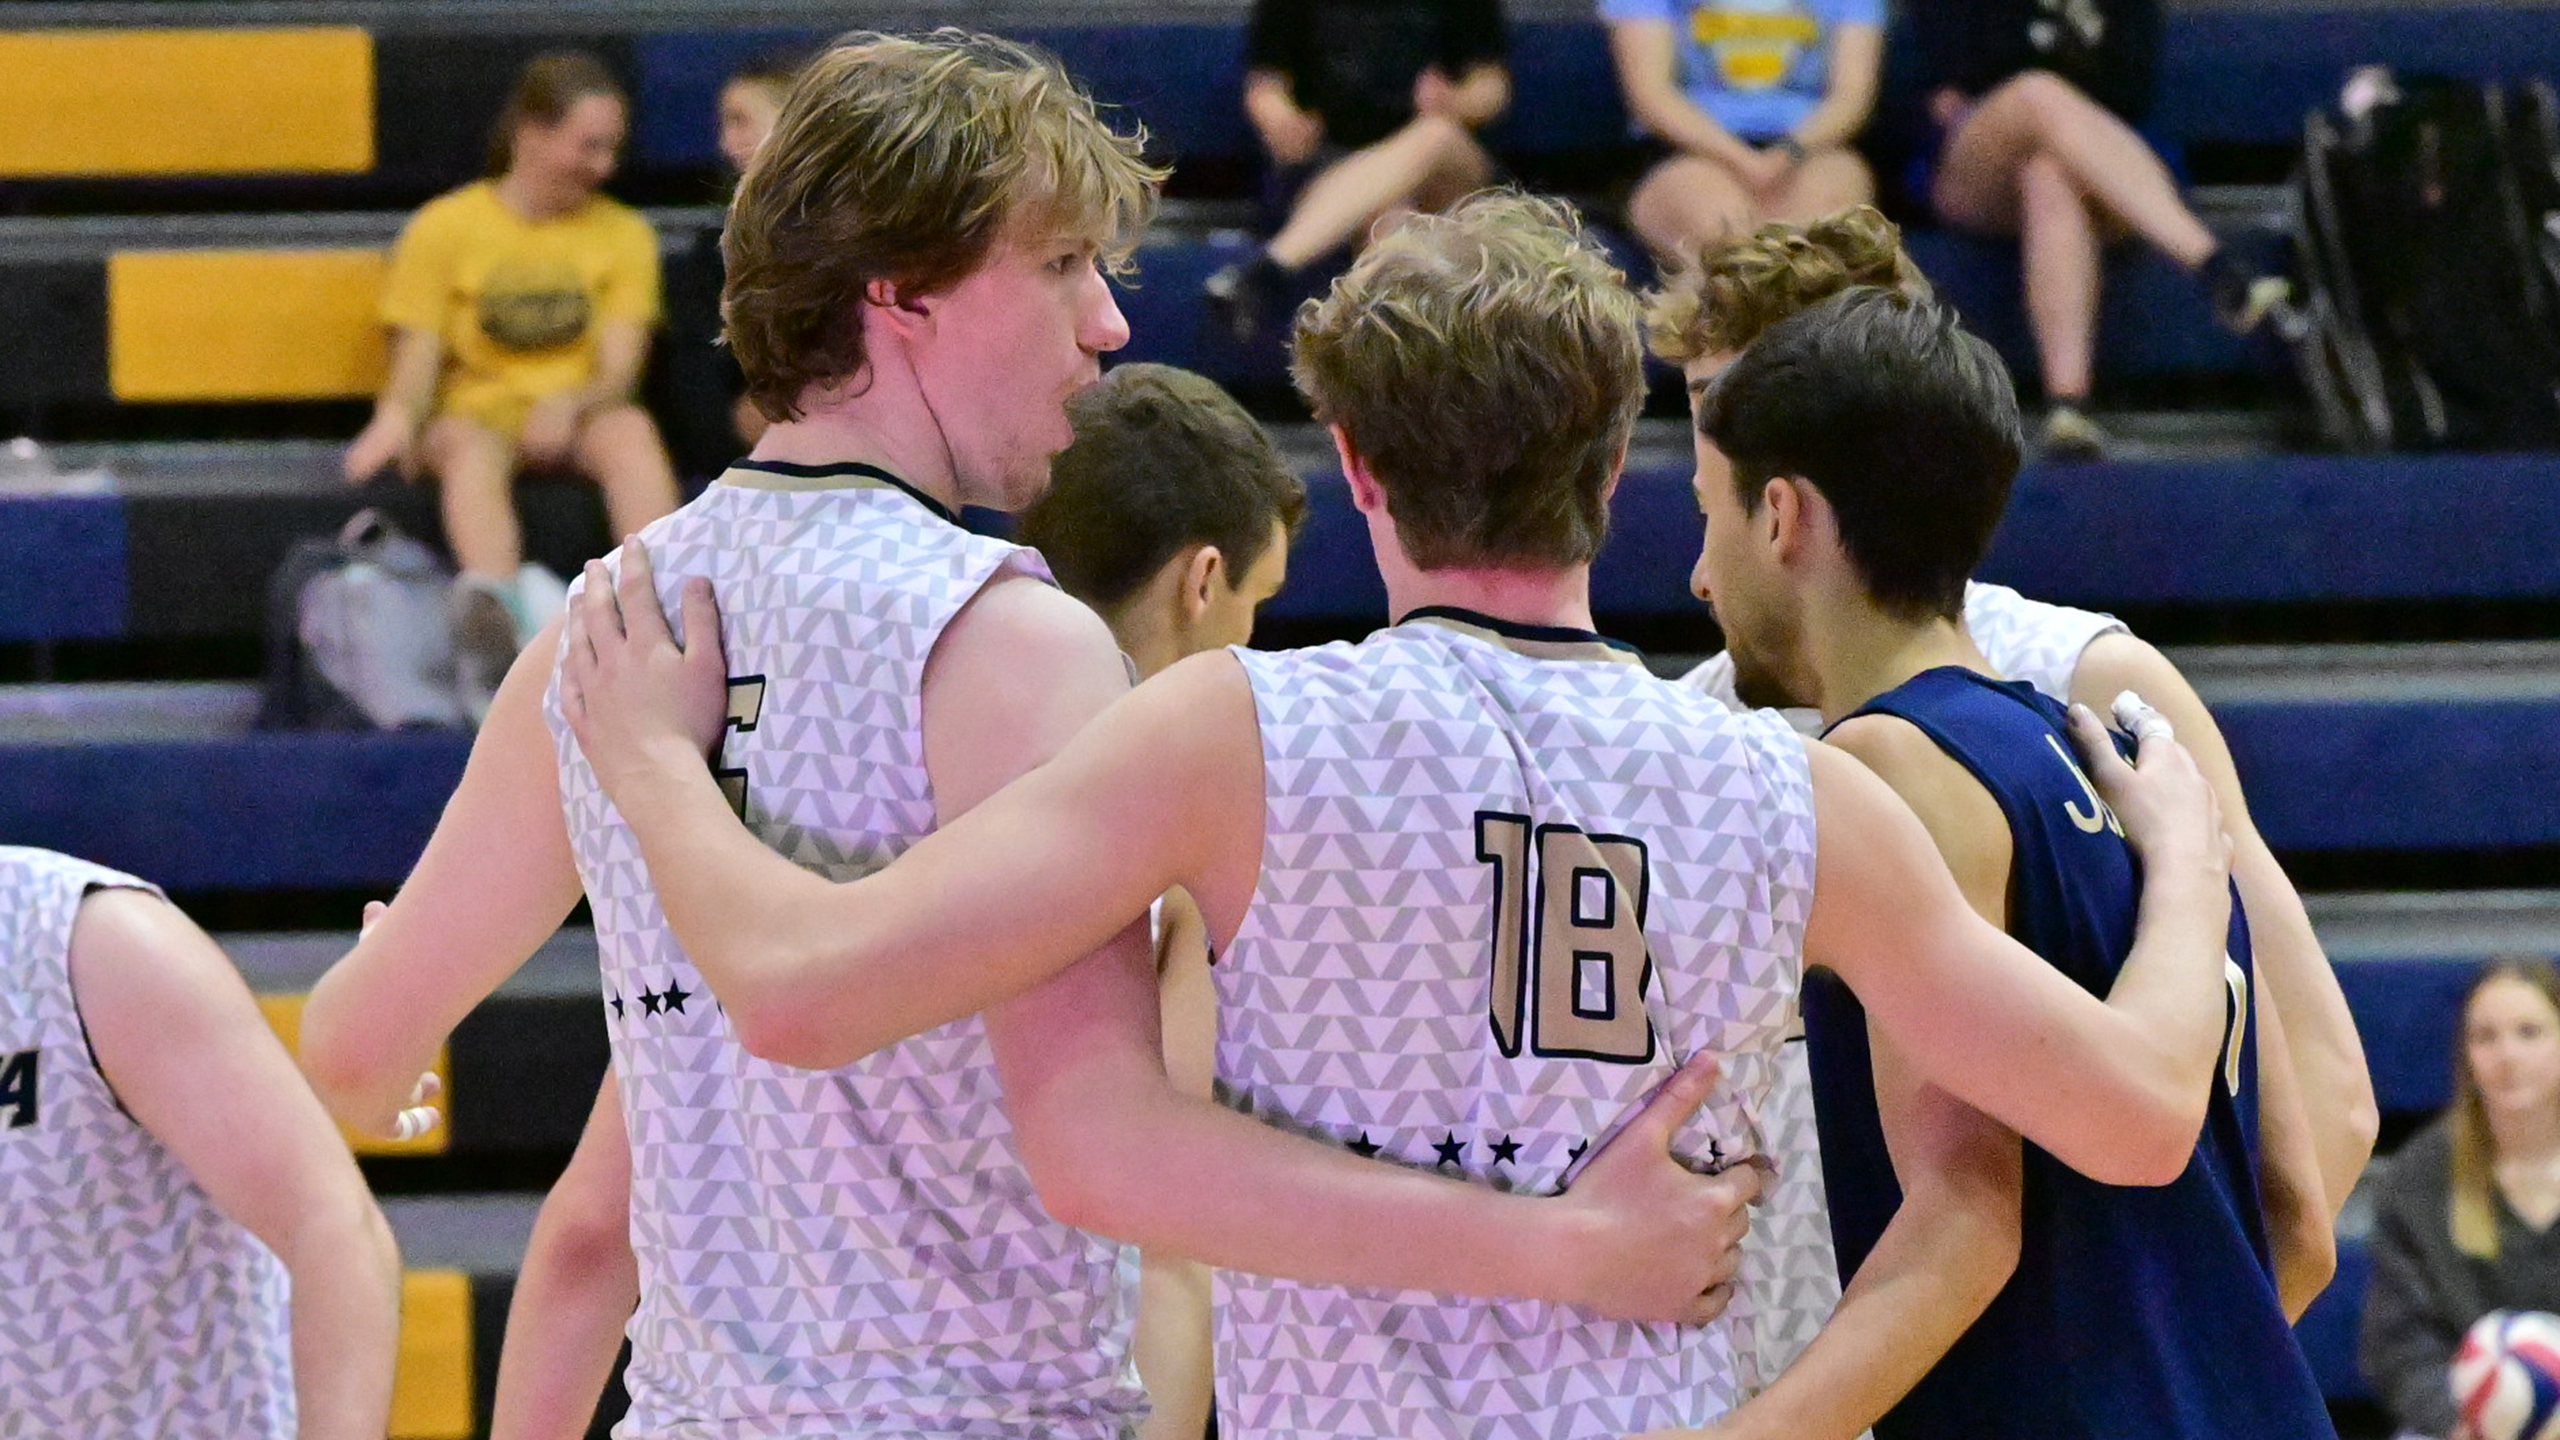 Men's Volleyball Sweeps Randolph-Macon to Close CVC Play, Gives DeHaven his 300th Career Win